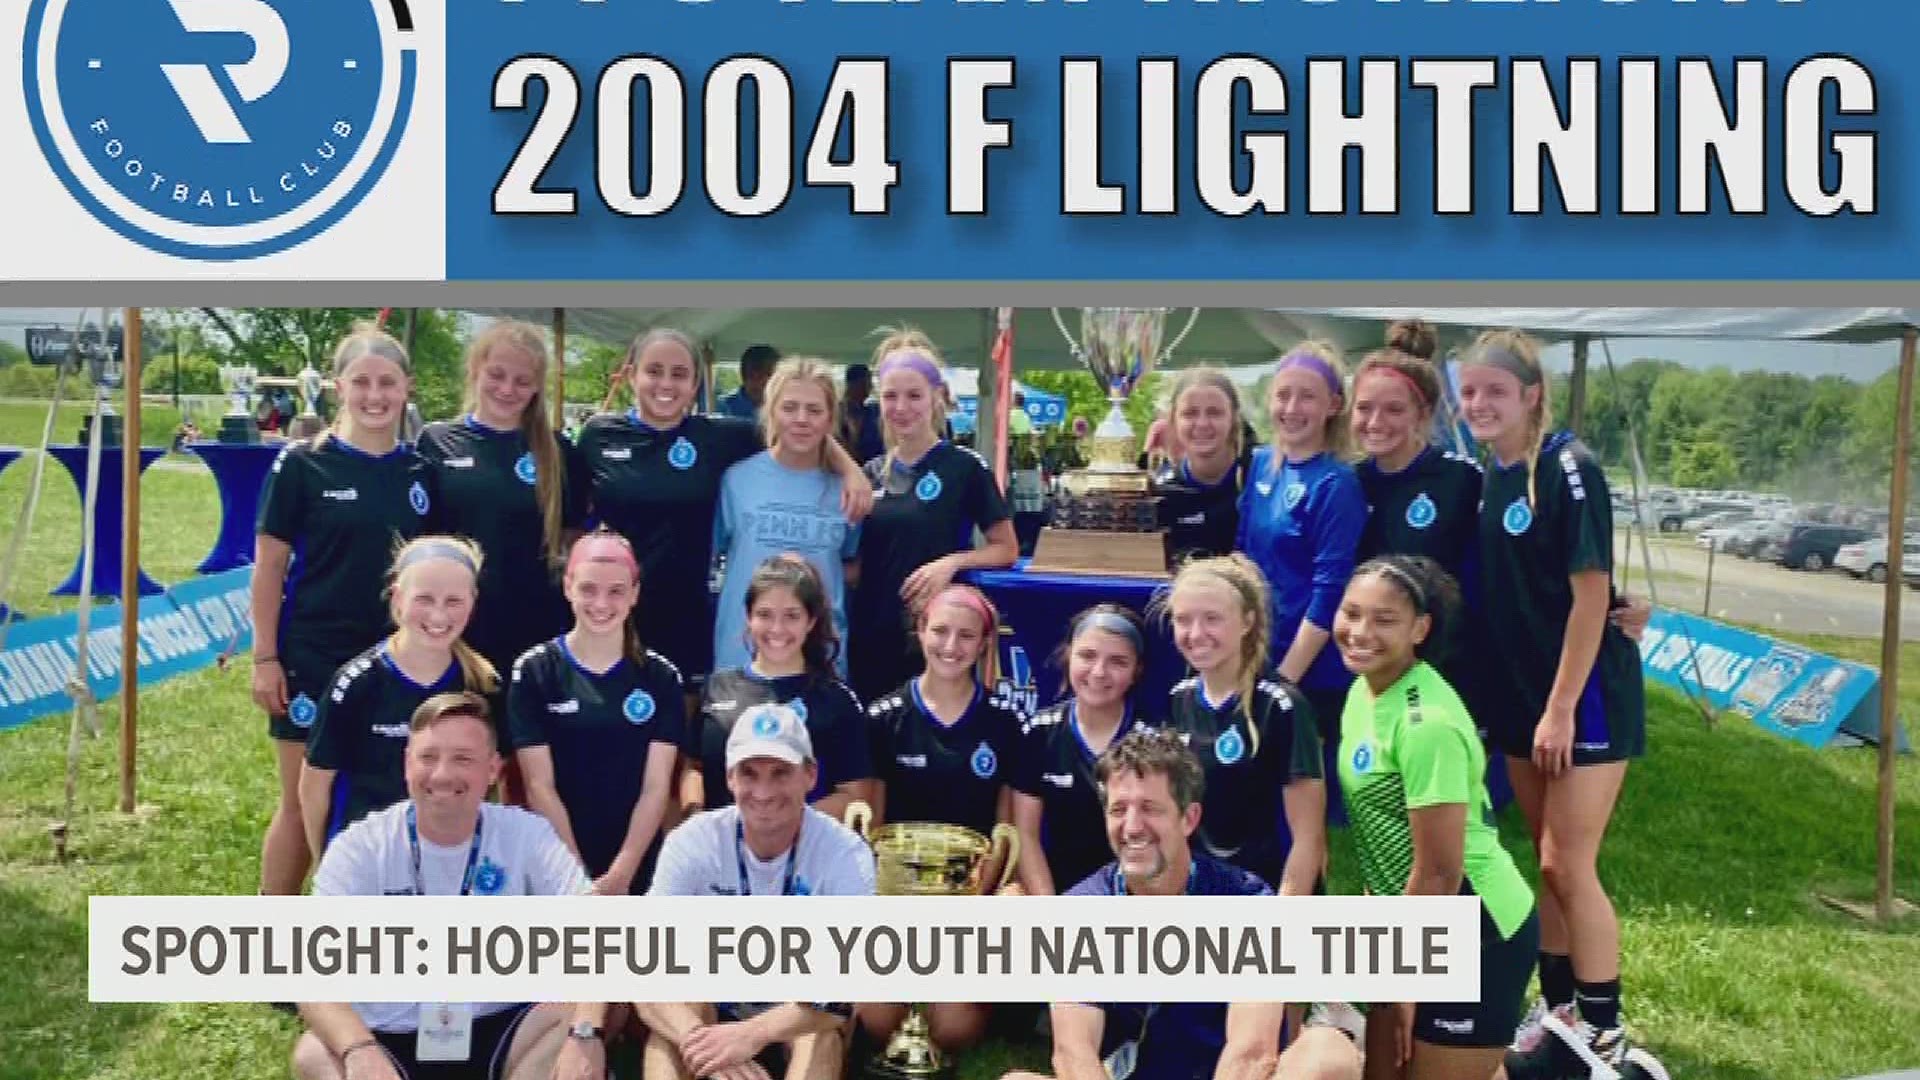 Lightning hope to become the first team from PA to win a title.